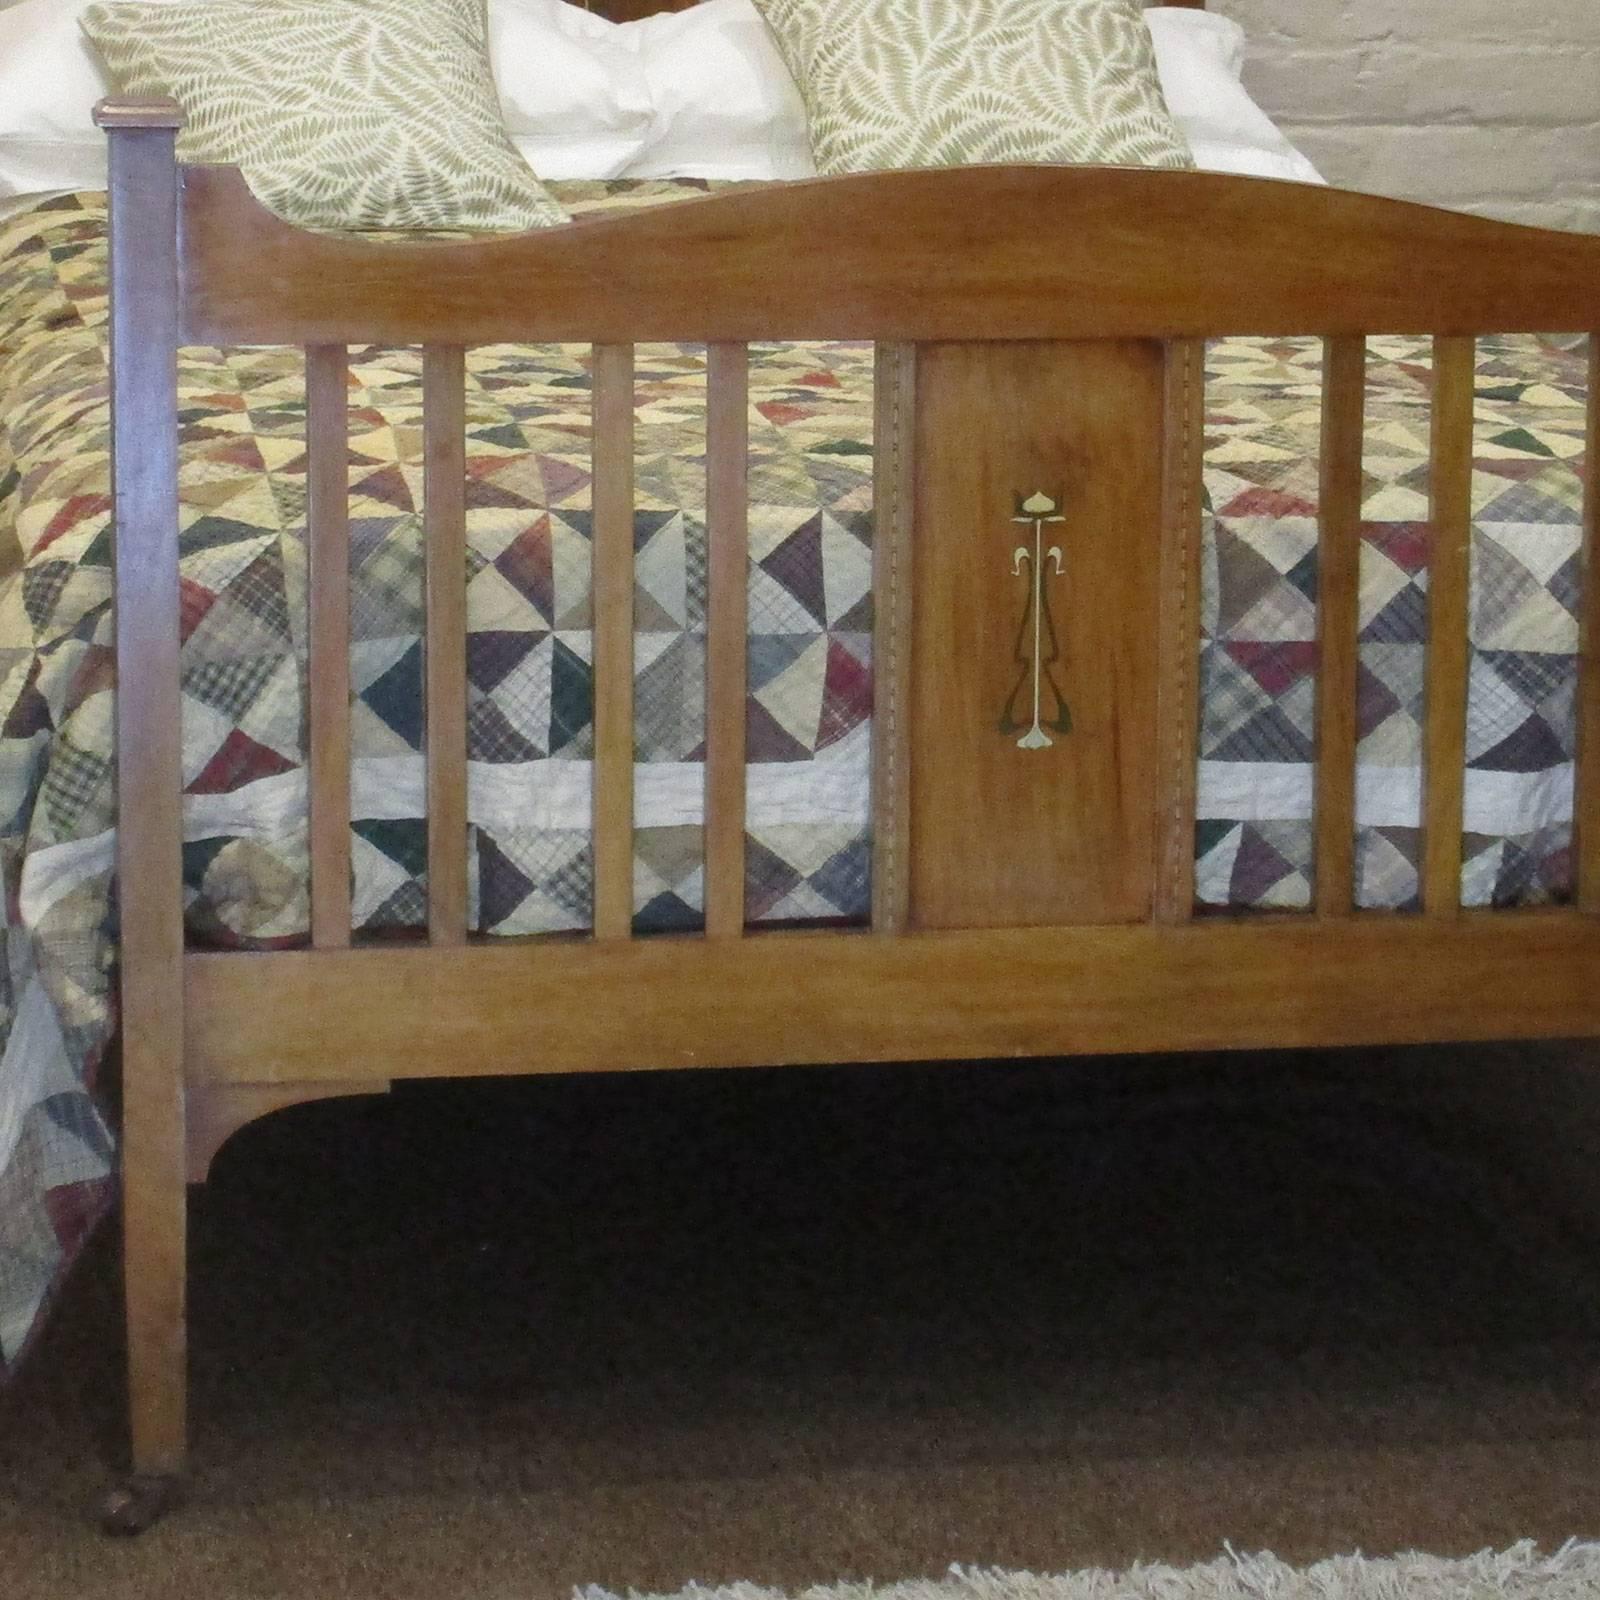 A simple but elegant Edwardian bed made from mahogany with Art Nouveau inlay. Each side of the shaped bed ends are pagoda cups and original ceramic castors to finish off the look.

The bed accepts a 4ft 6in wide (54 in wide) base and